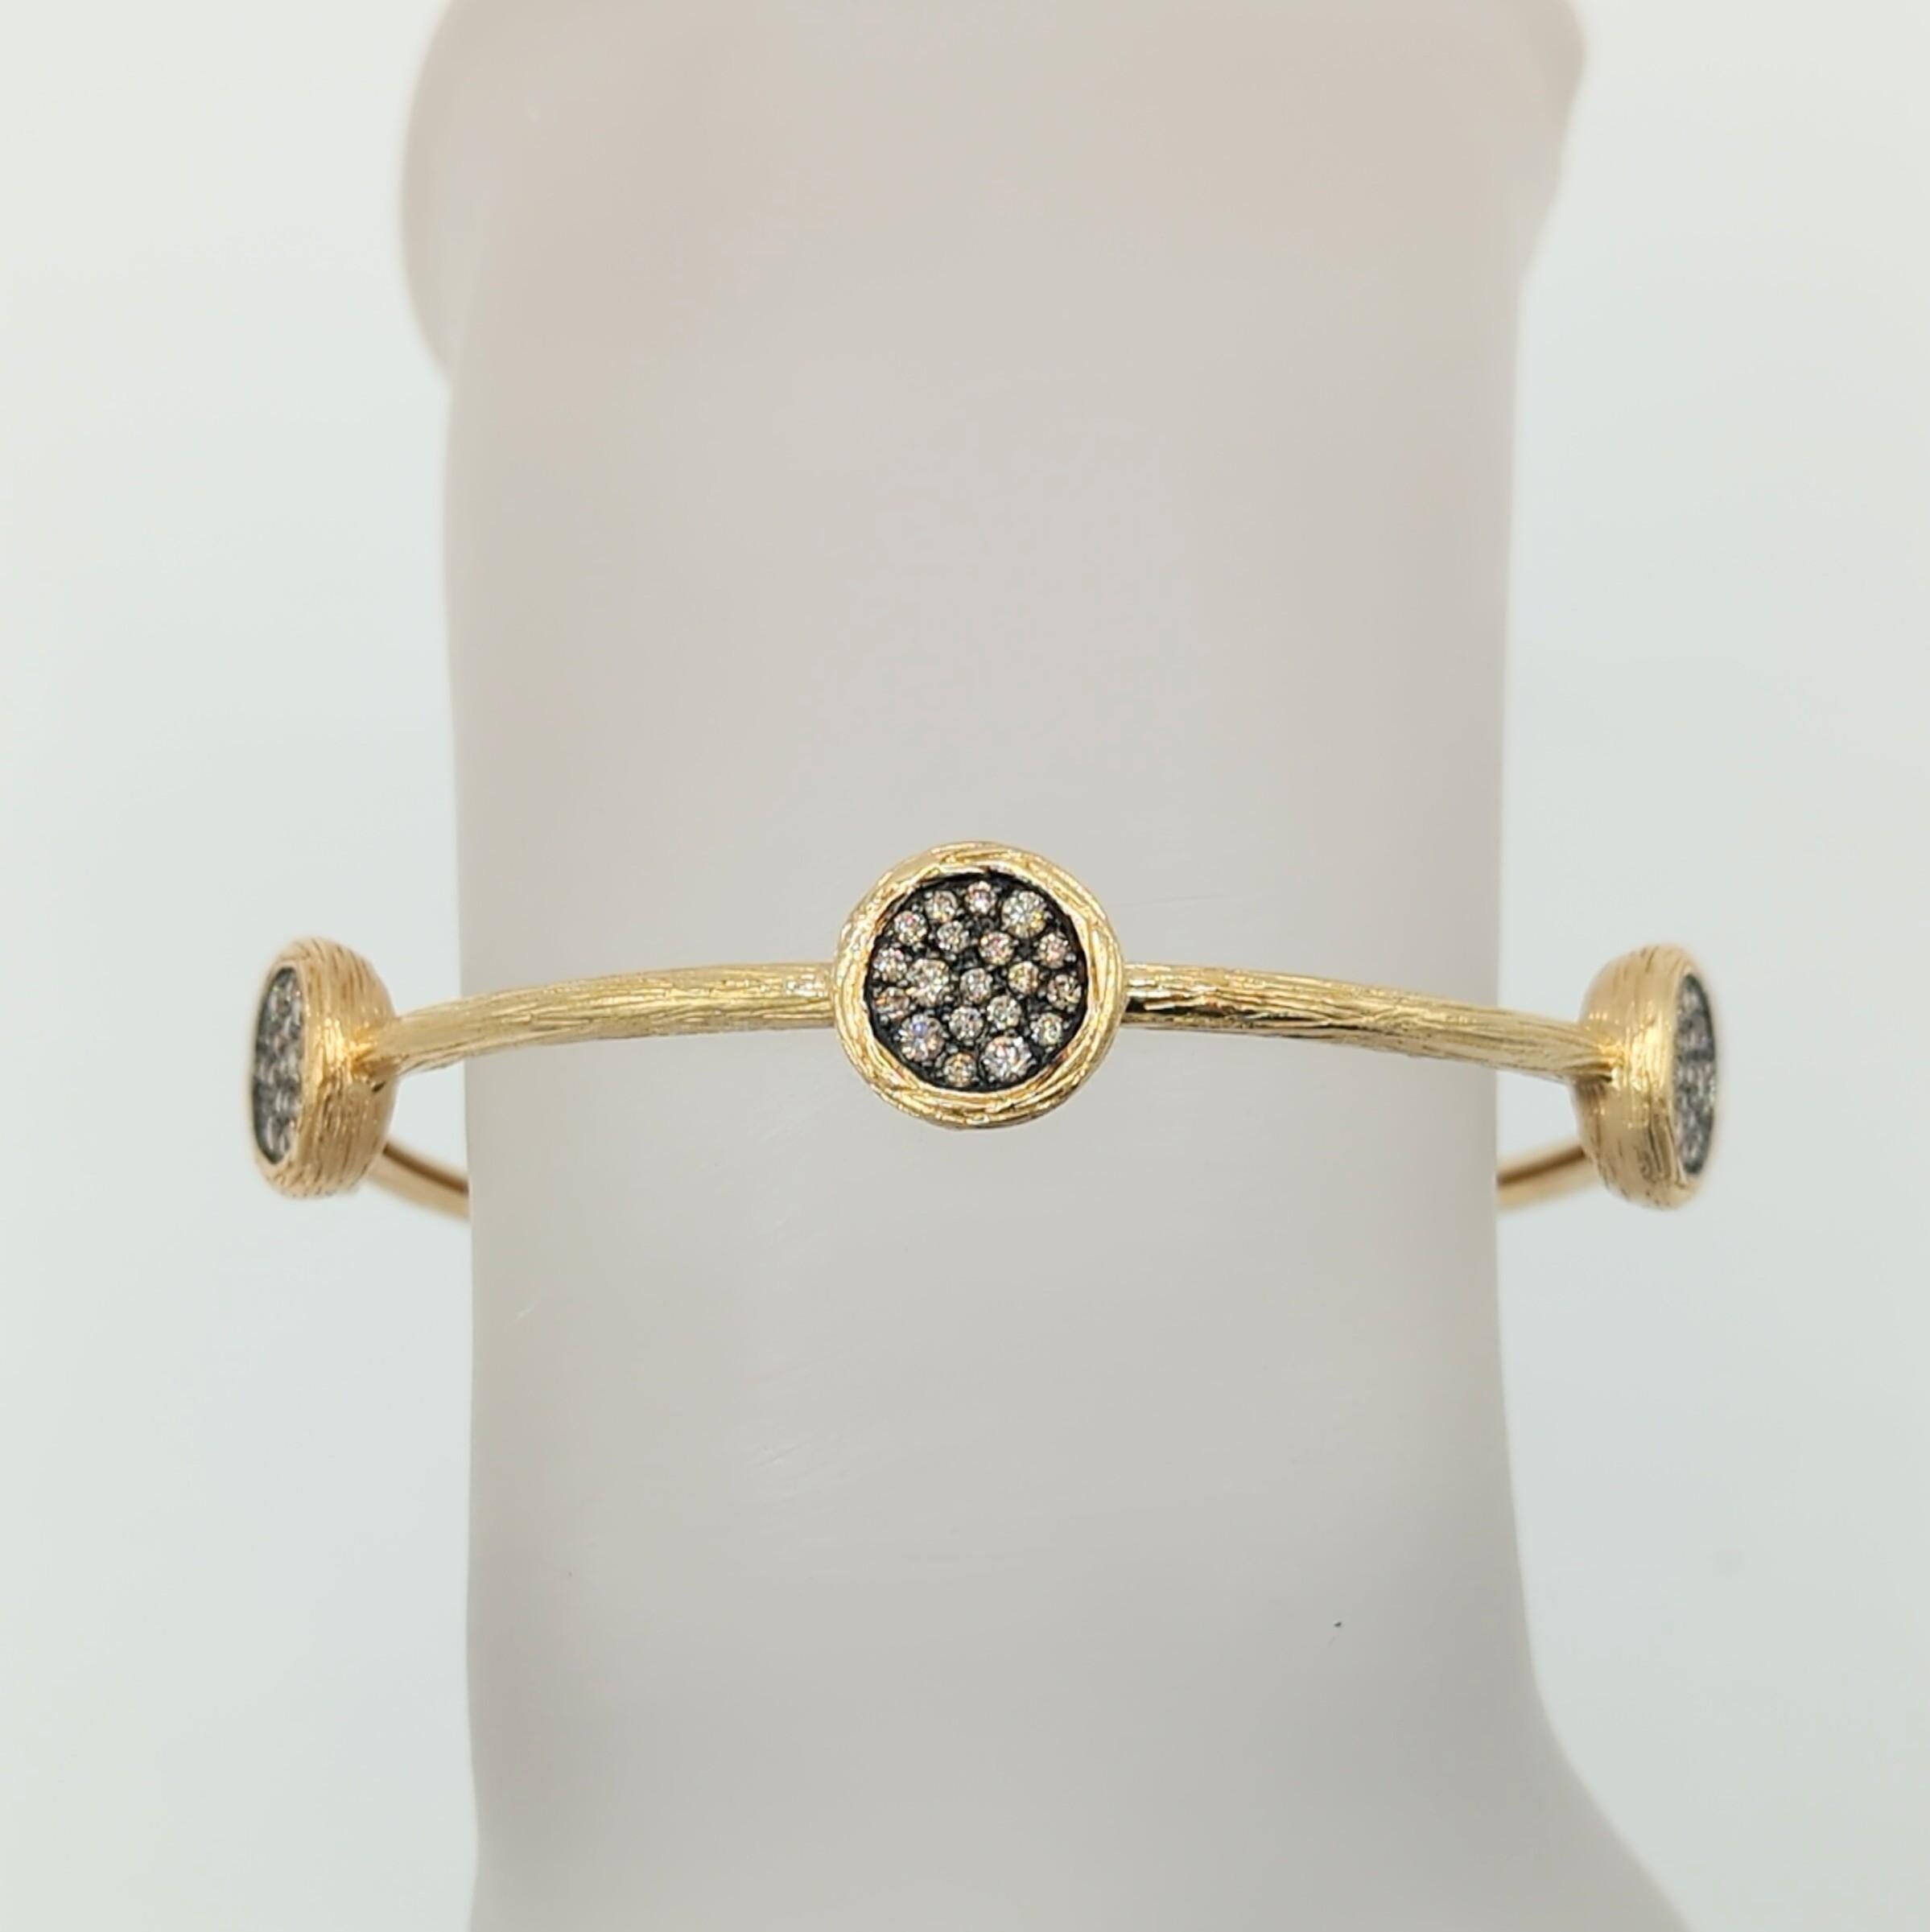 Beautiful 0.90 ct. champagne diamond rounds handmade in 14k textured yellow gold.  This bangle is fun and easy to wear with any outfit.